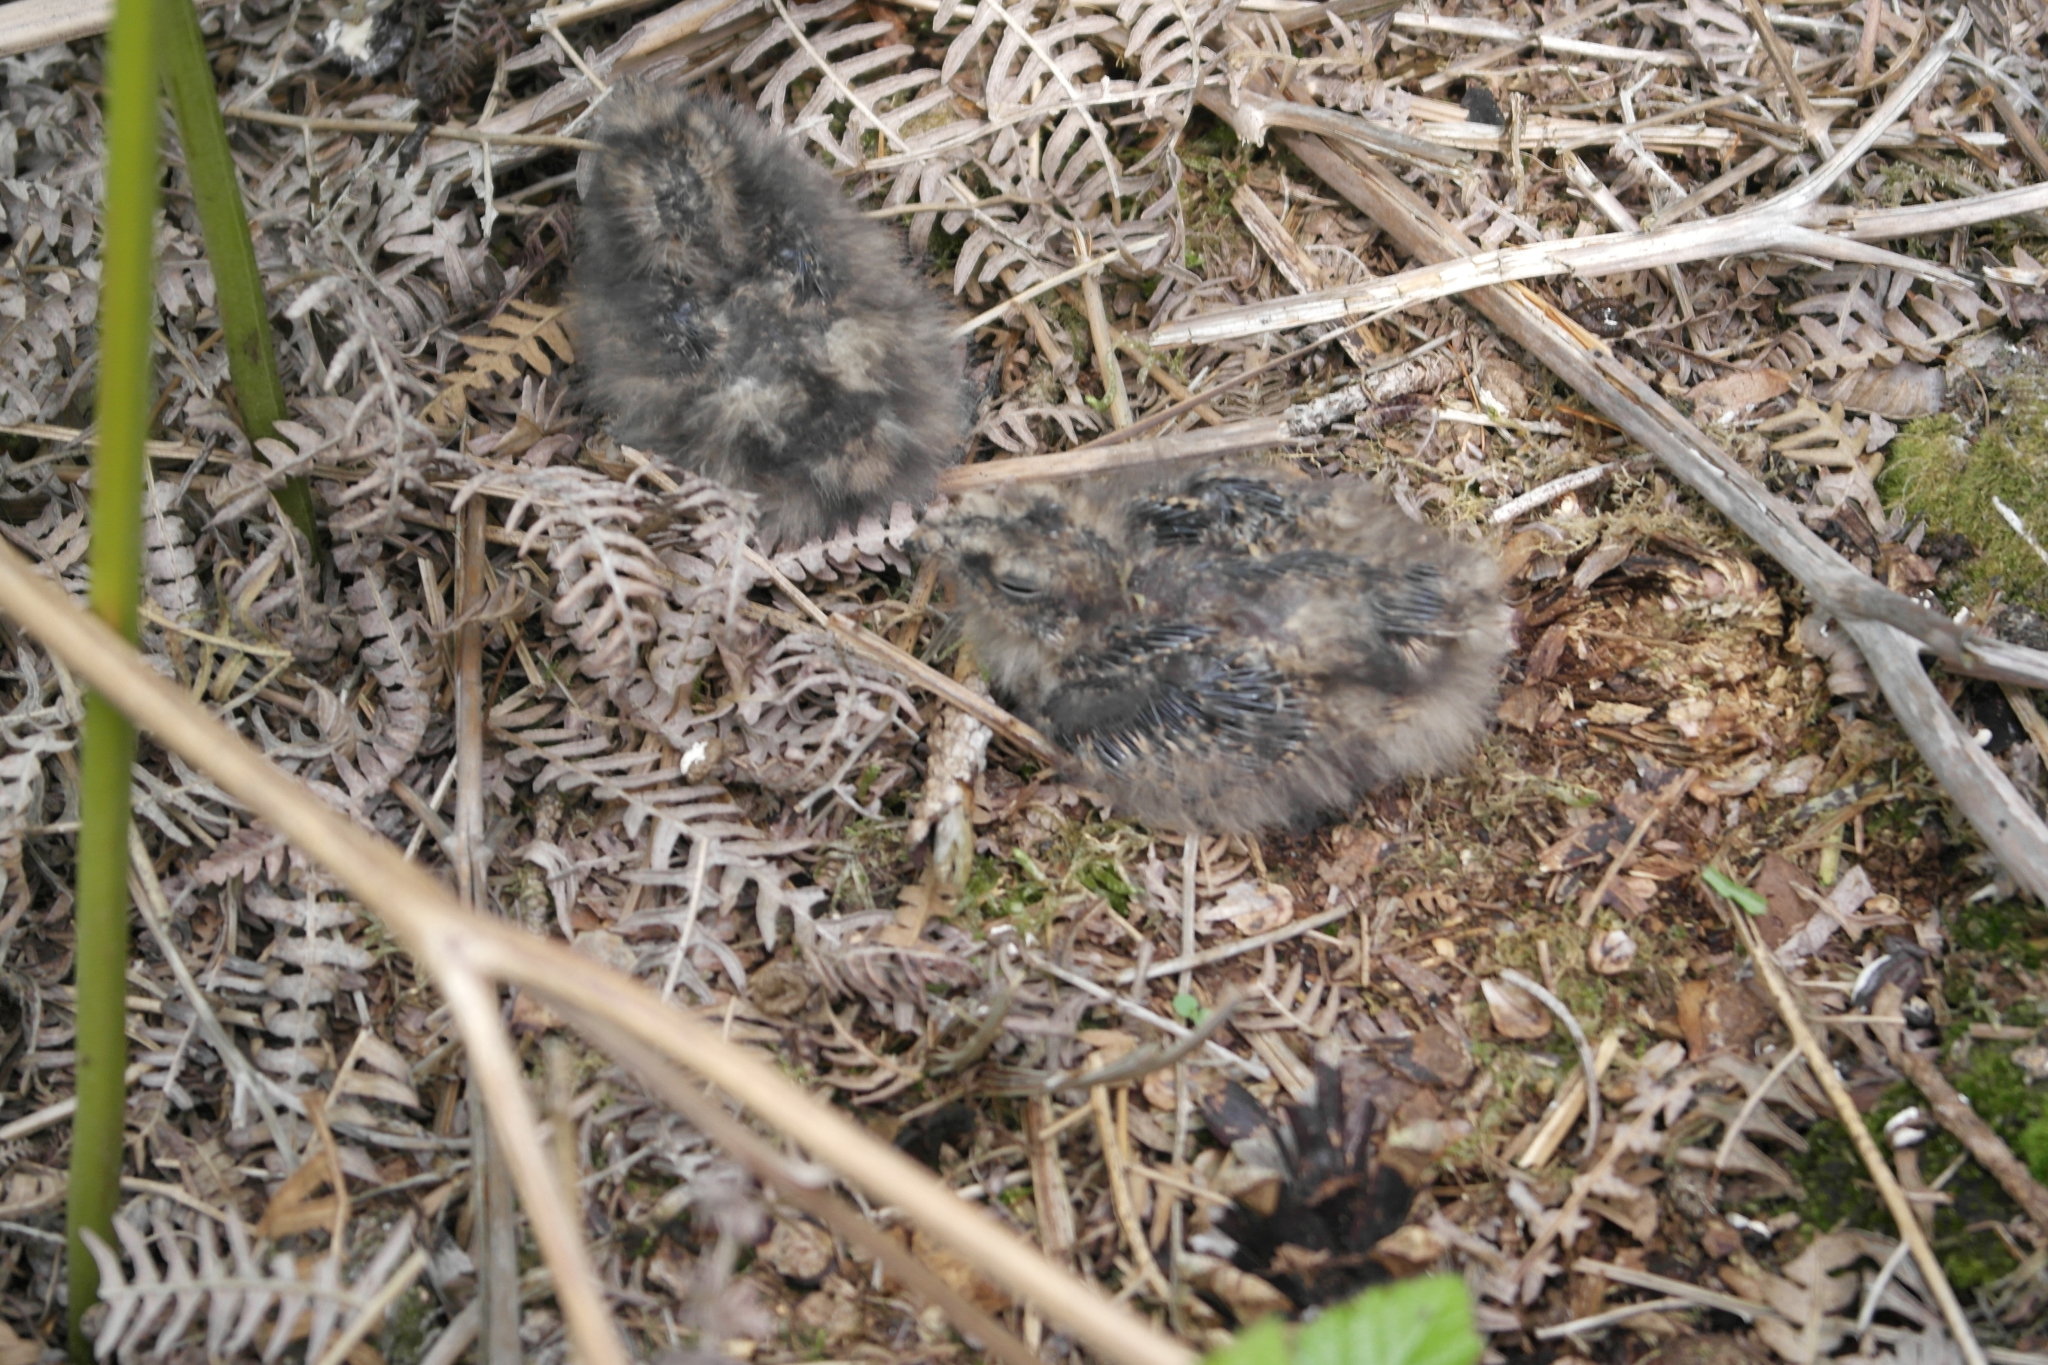 A photo from the FoTF Conservation Event - June 2019 - Nightjar Nest Hunt with members of the BTO - British Trust for Ornithology : A Nightjar nest, with baby Nightjars